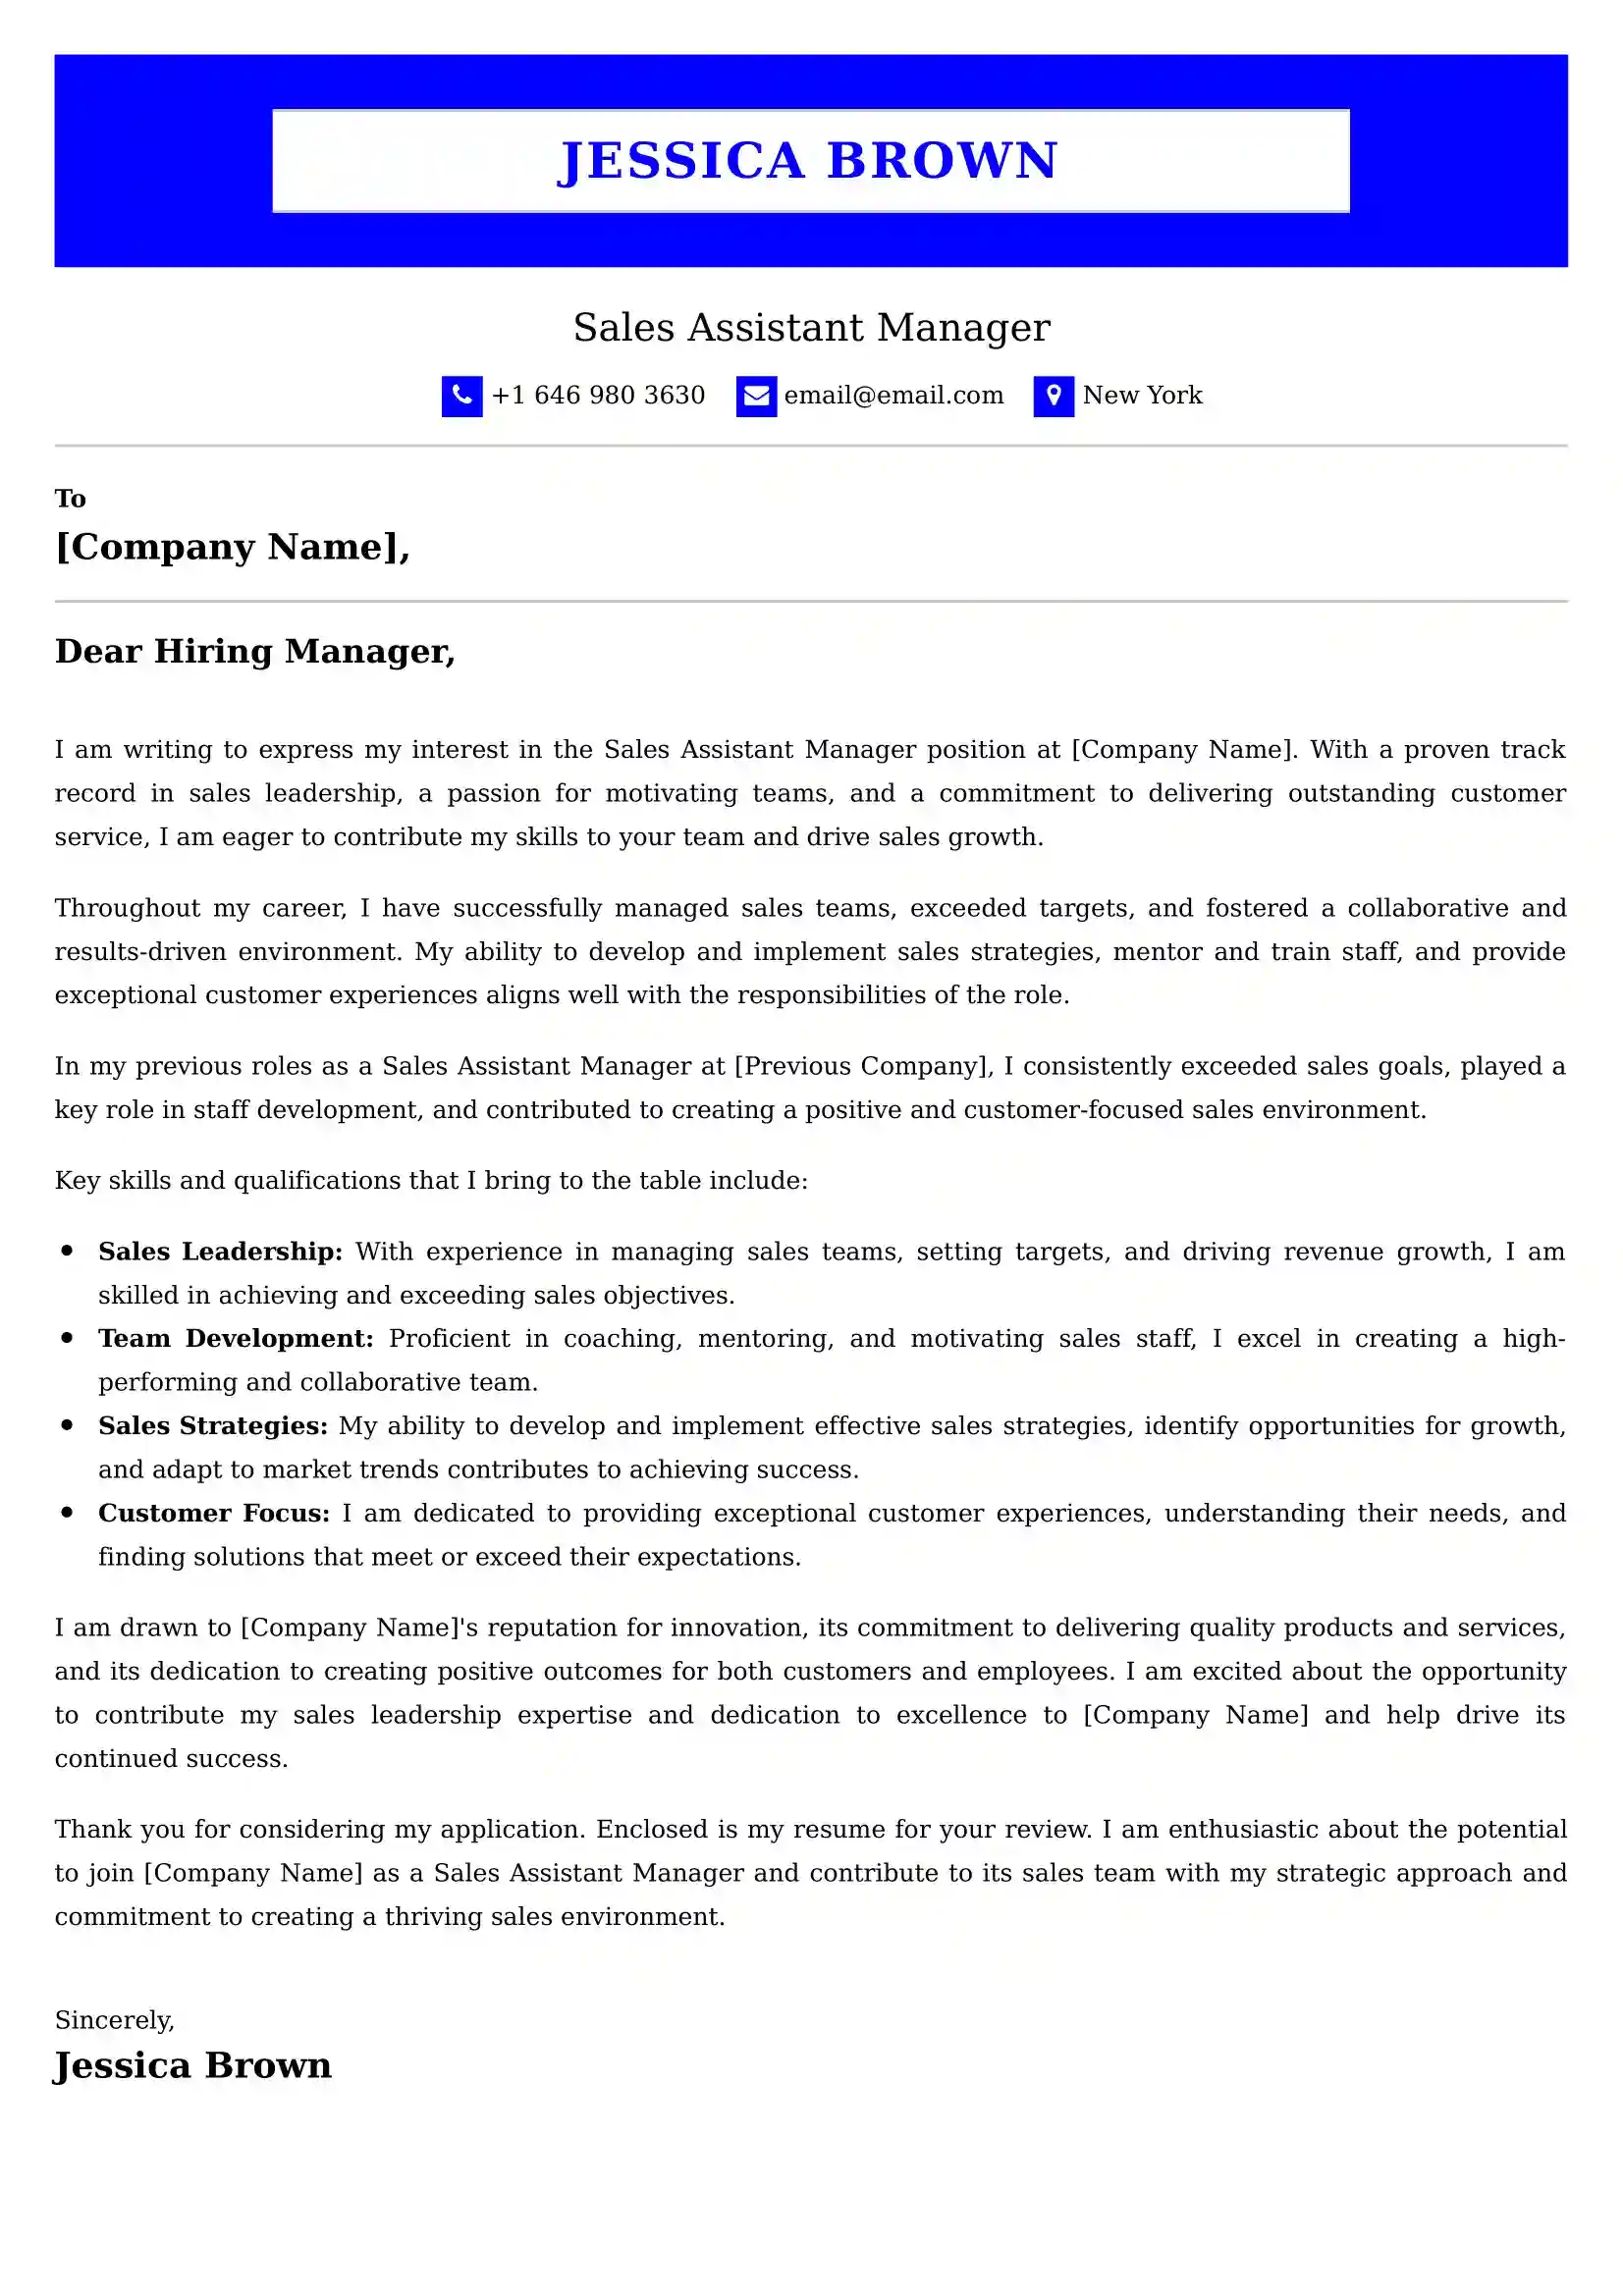 Sales Assistant Manager Cover Letter Examples - Latest UK Format